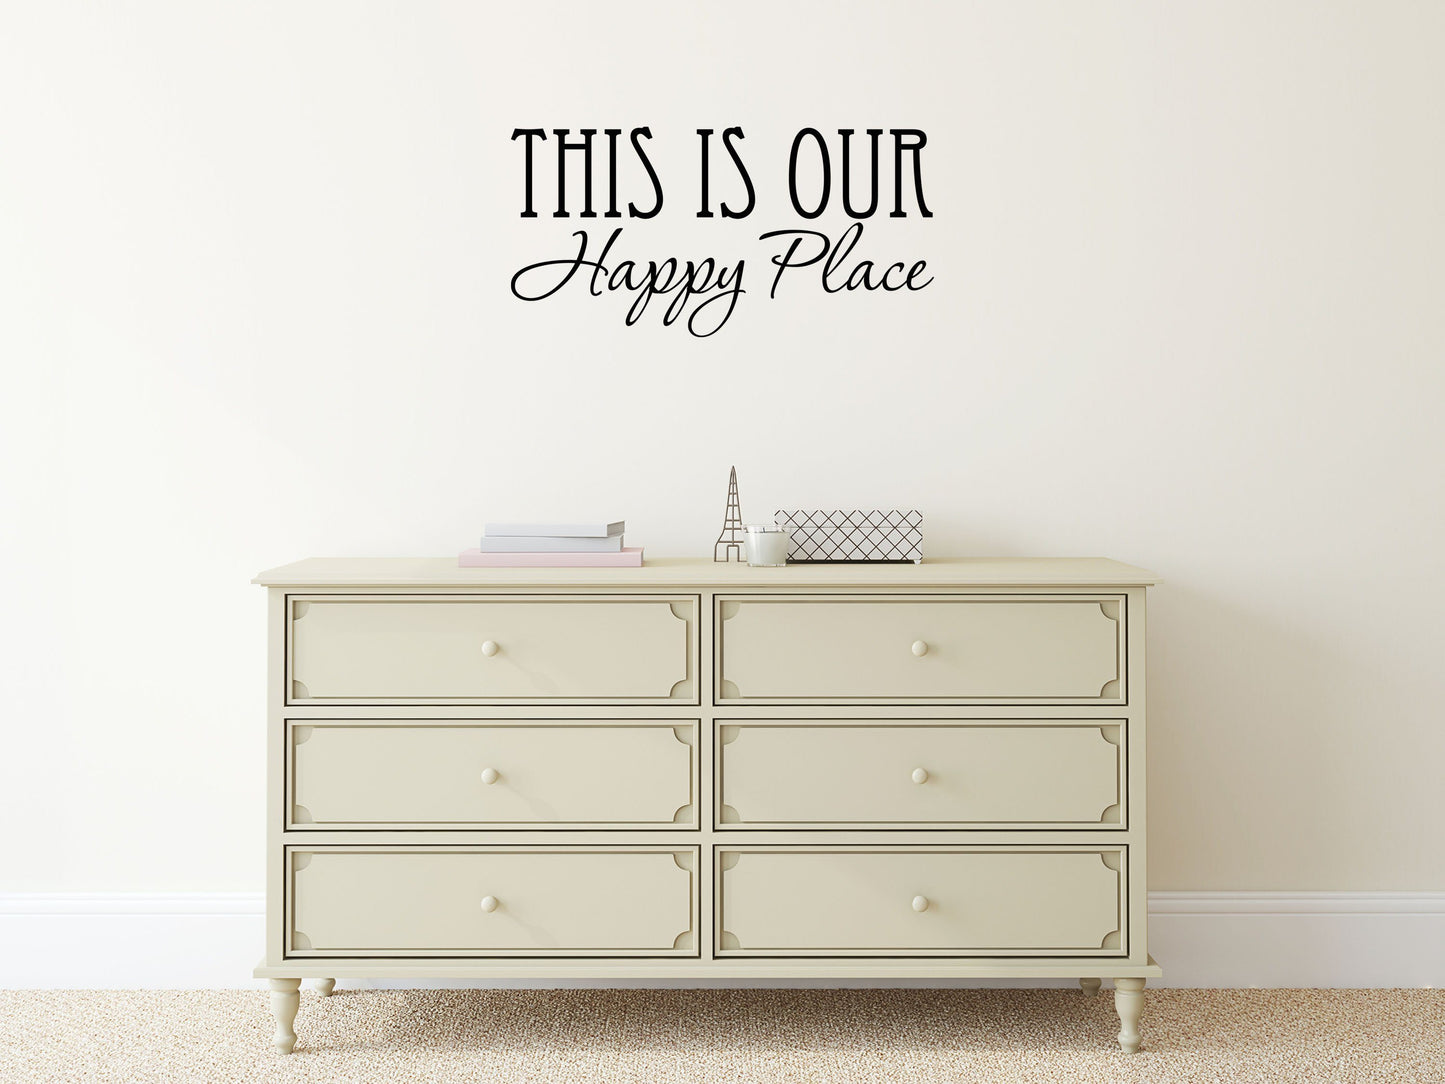 This Is Our Happy Place - Inspirational Wall Signs Vinyl Wall Decal Done 